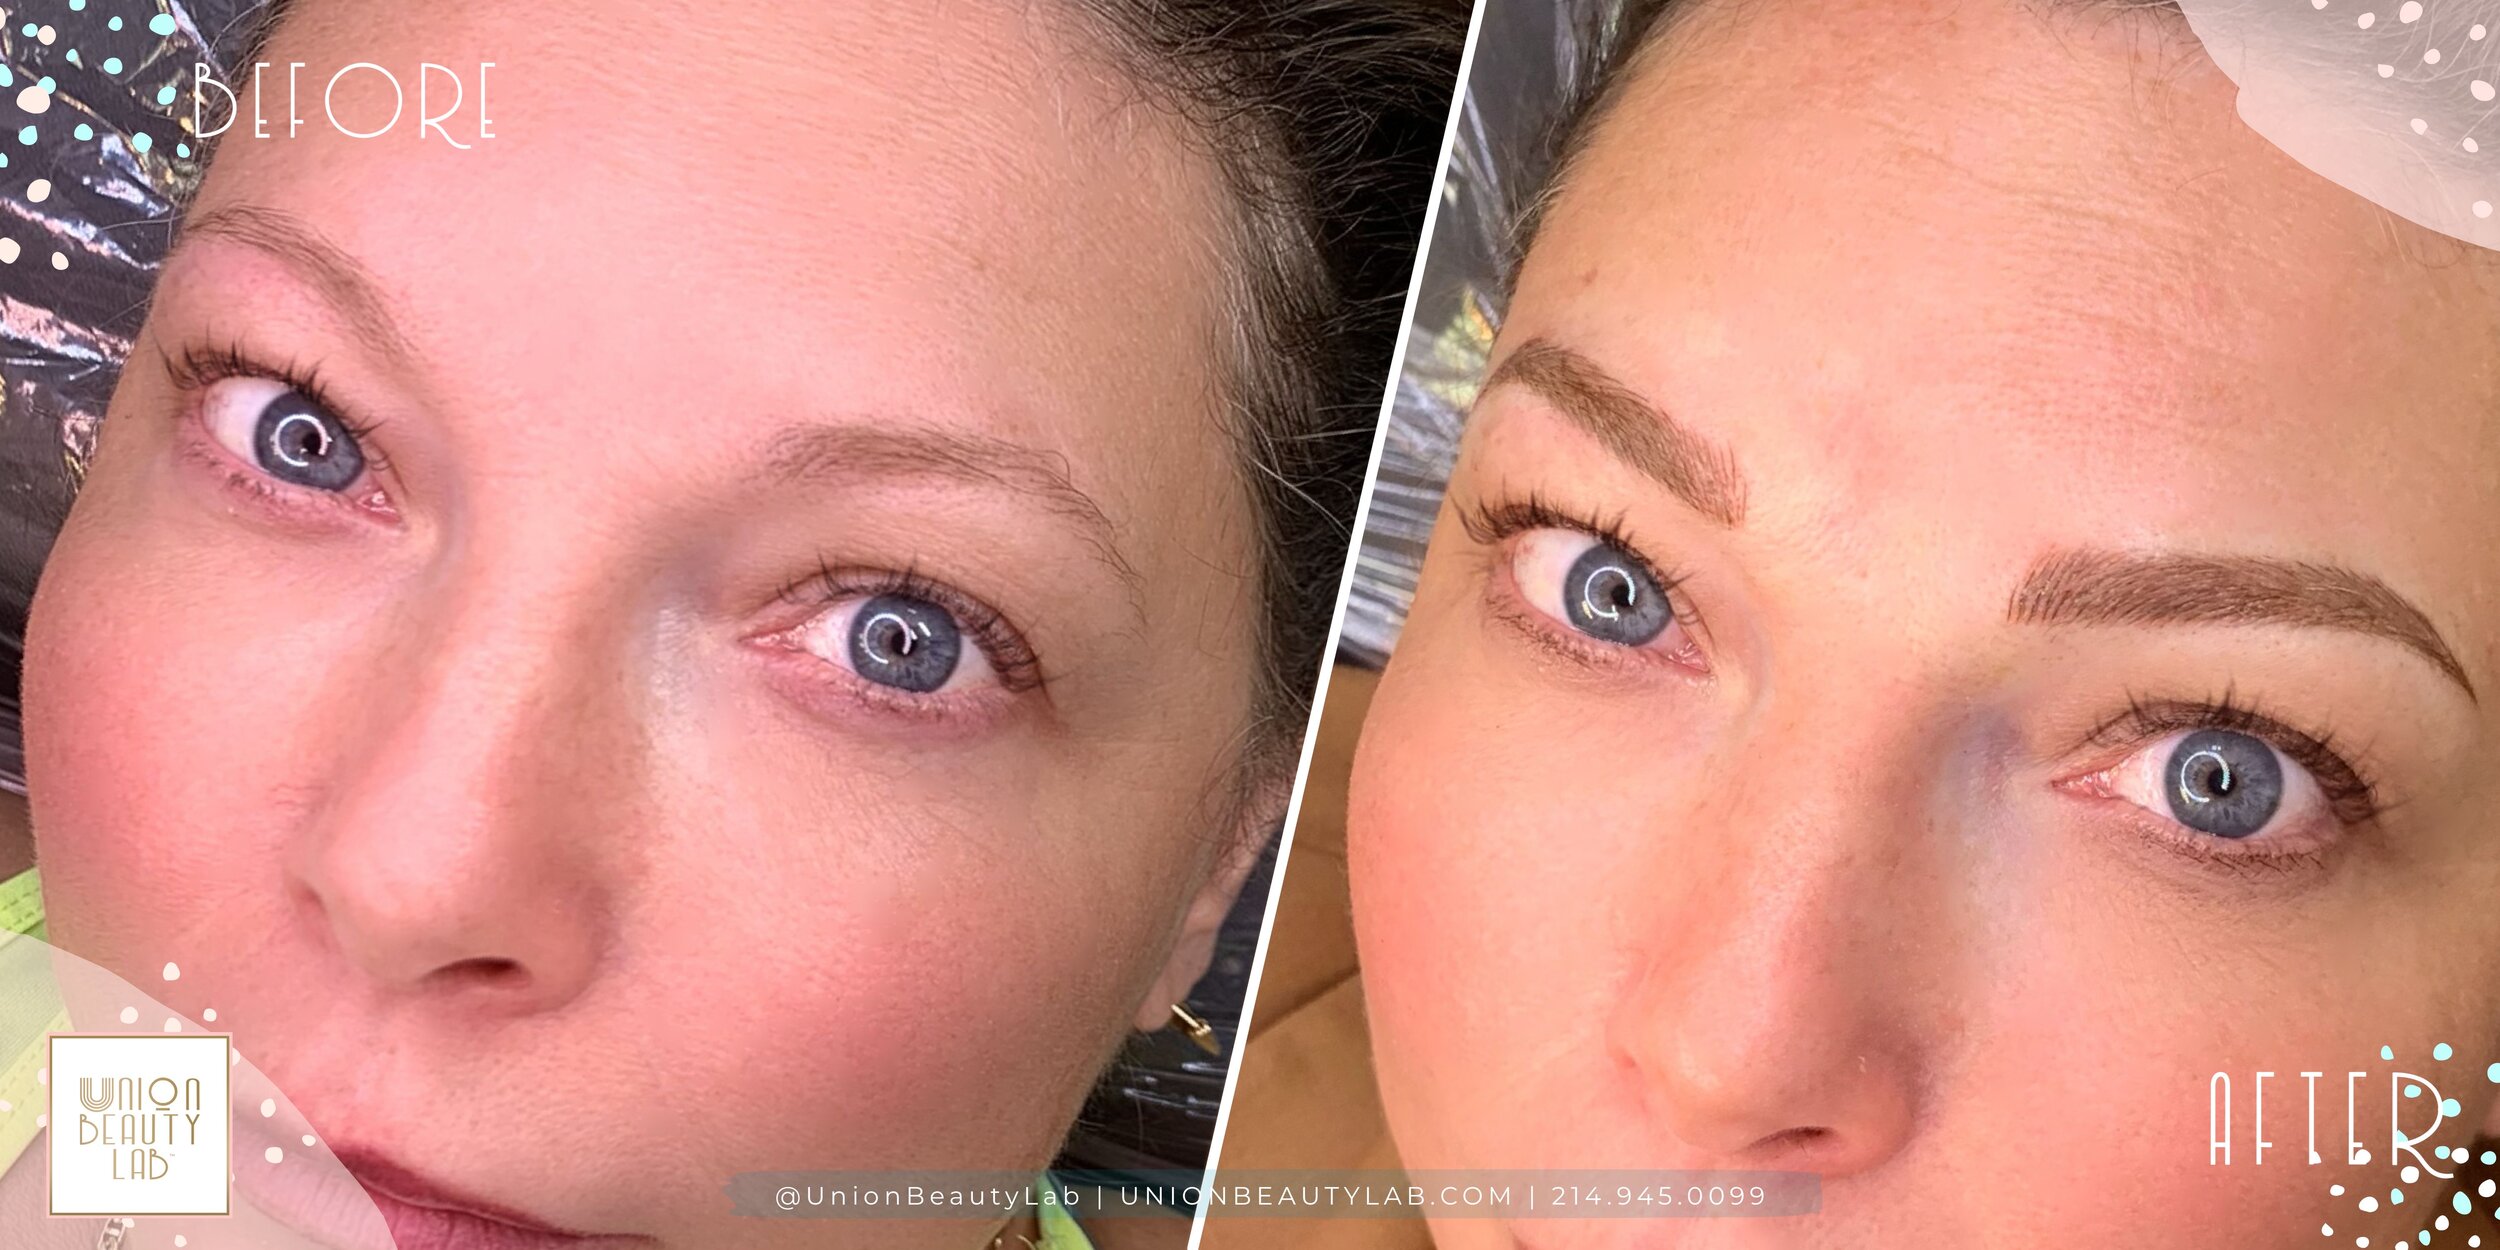 2149450099 Union Beauty Lab Advanced Microblading Cosmetic Tattooing Dallas Blonde 2.JPG